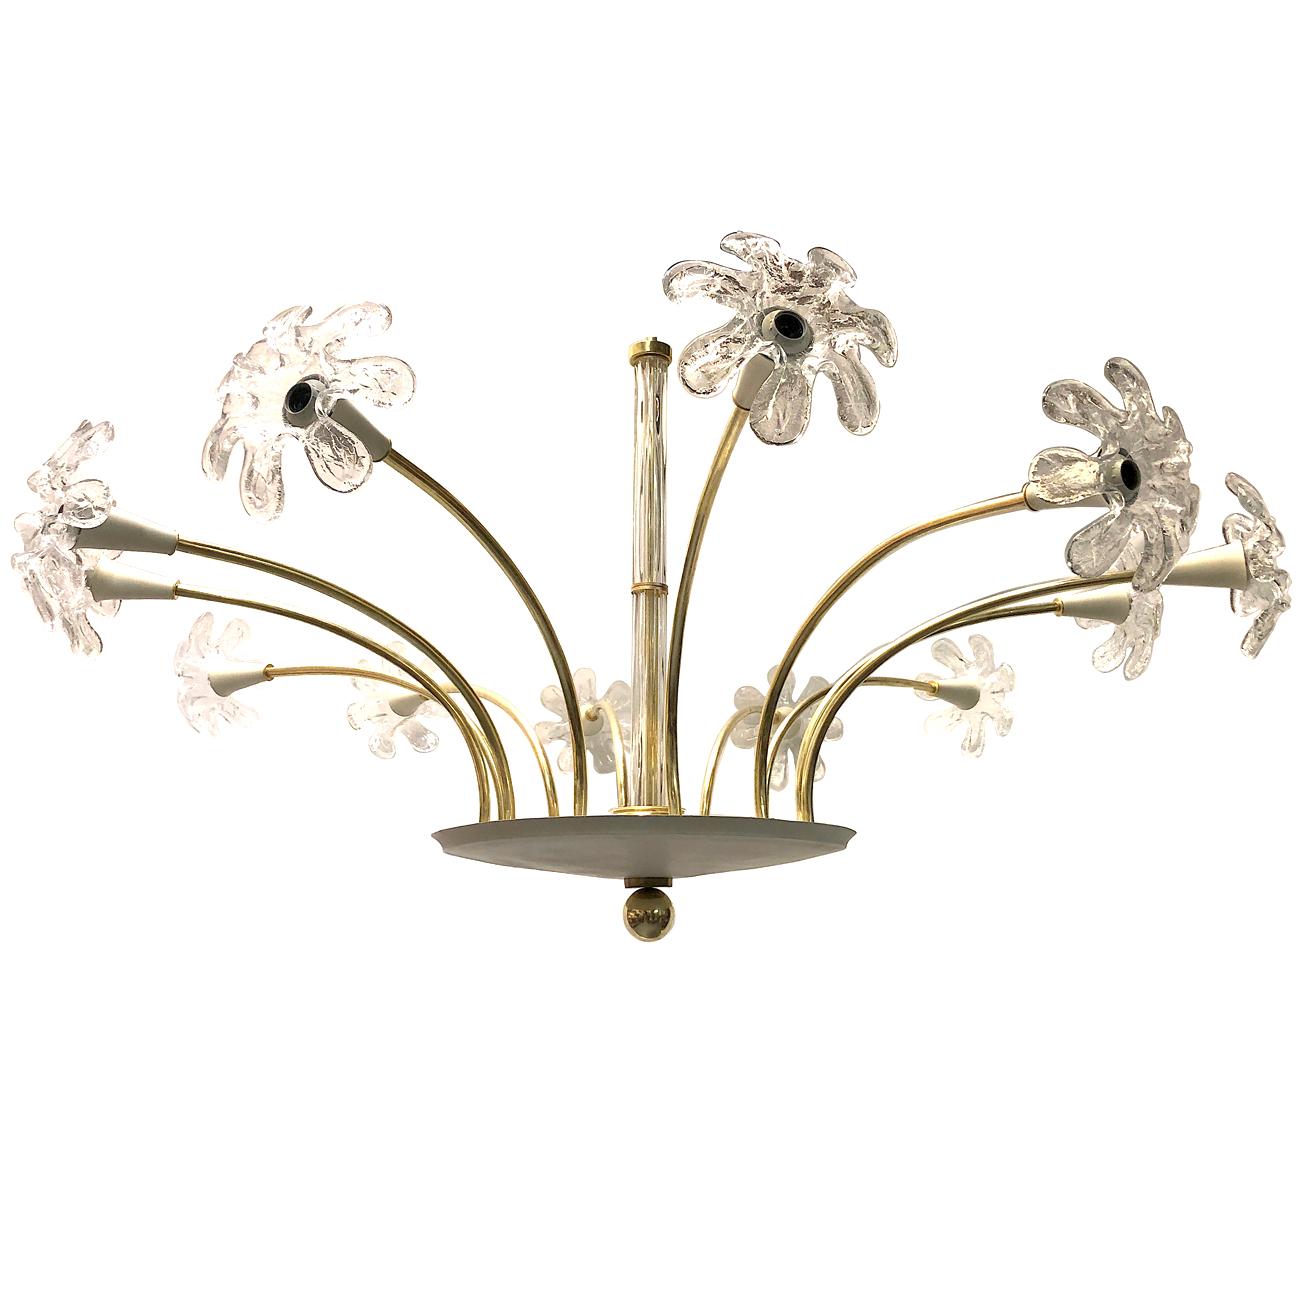 An Italian circa 1960s twelve-light painted and gilt bronze chandelier with large glass flowers and glass stem body.

Measurements:
Diameter 62